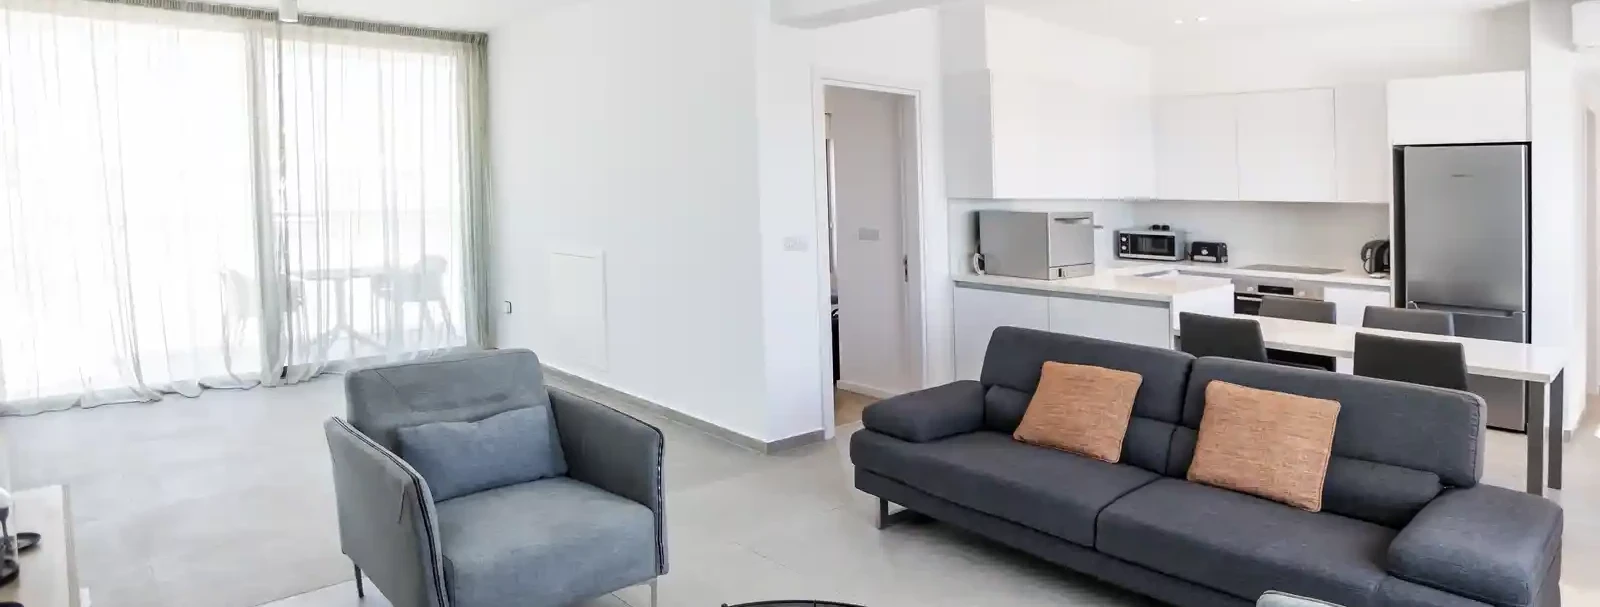 2-bedroom penthouse to rent €2.800, image 1